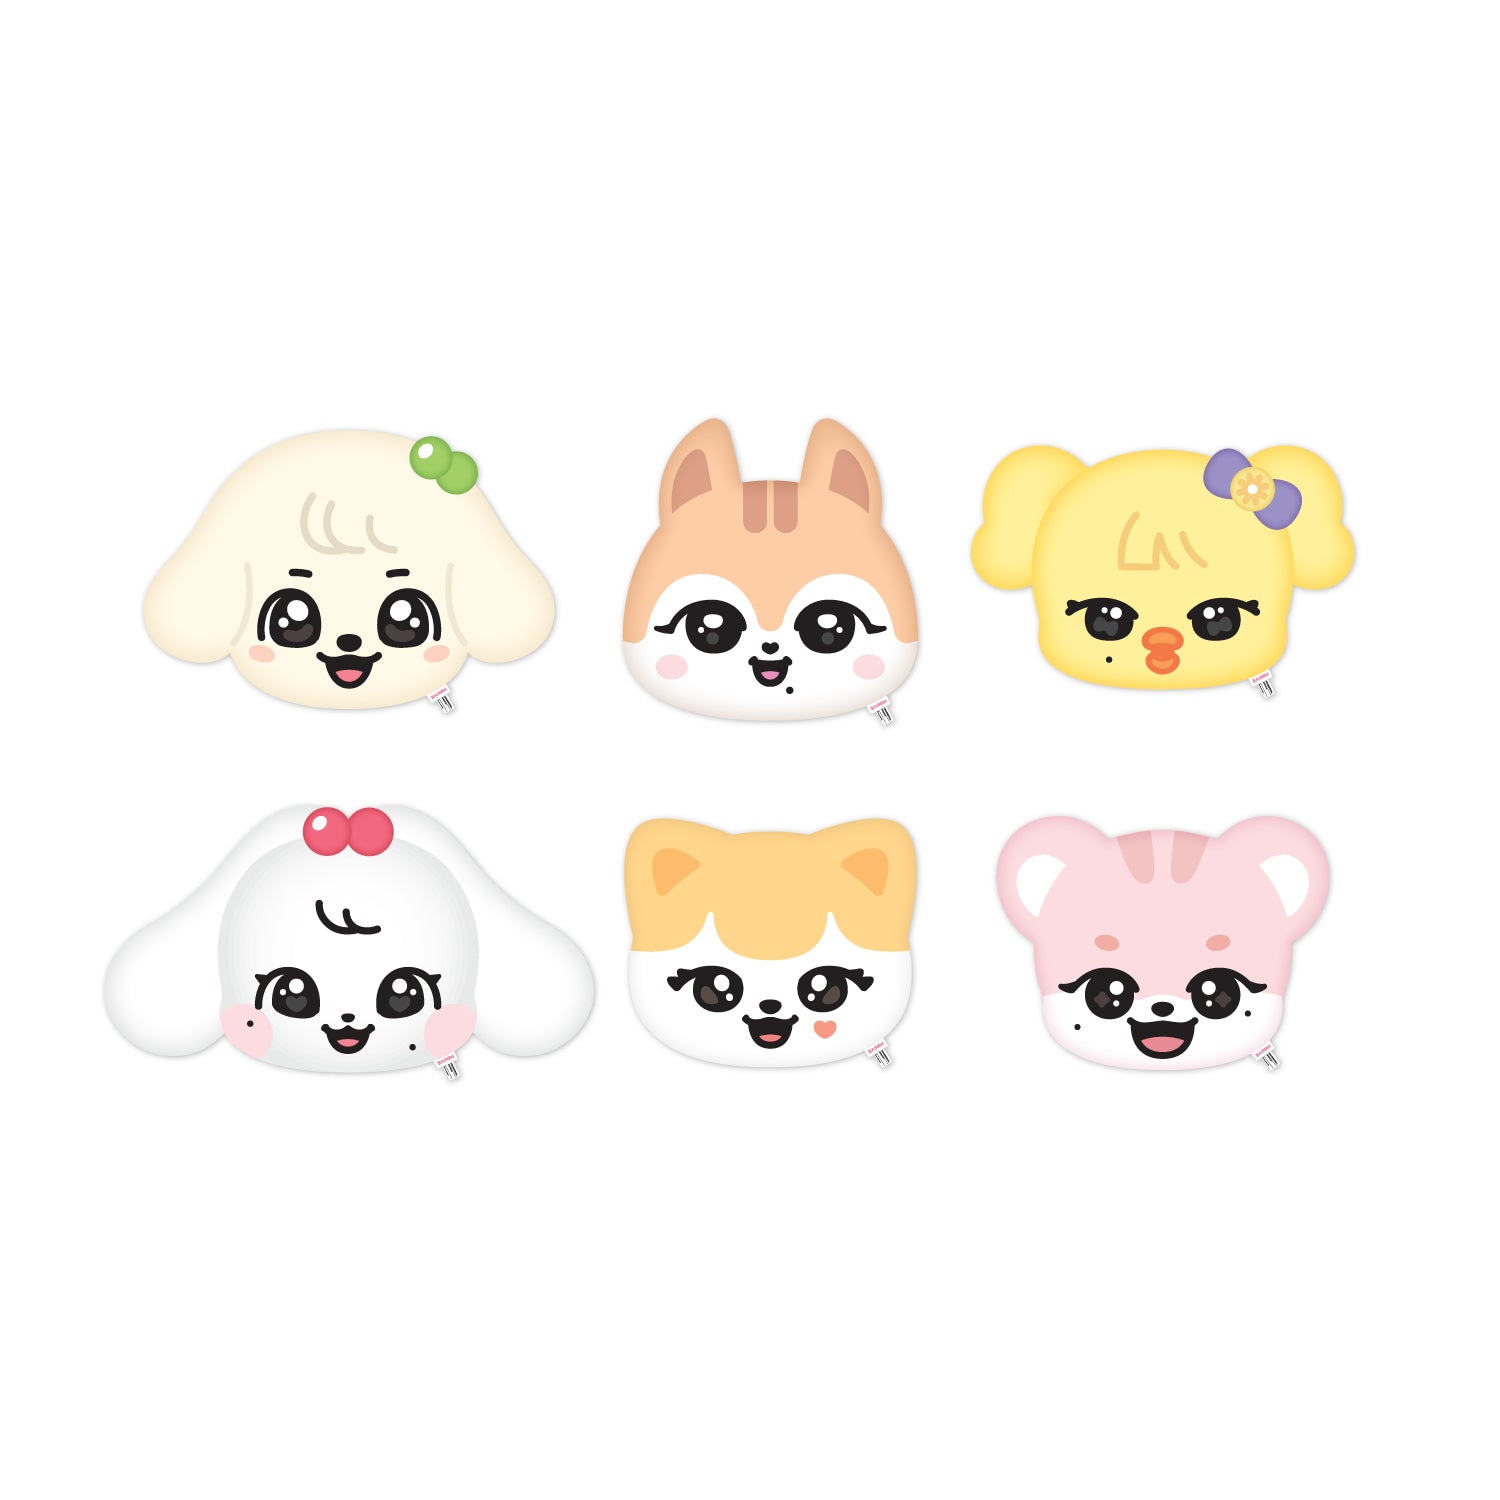 [PRE-ORDER] IVE - CHARACTER MD MINIVE FACE CUSHION